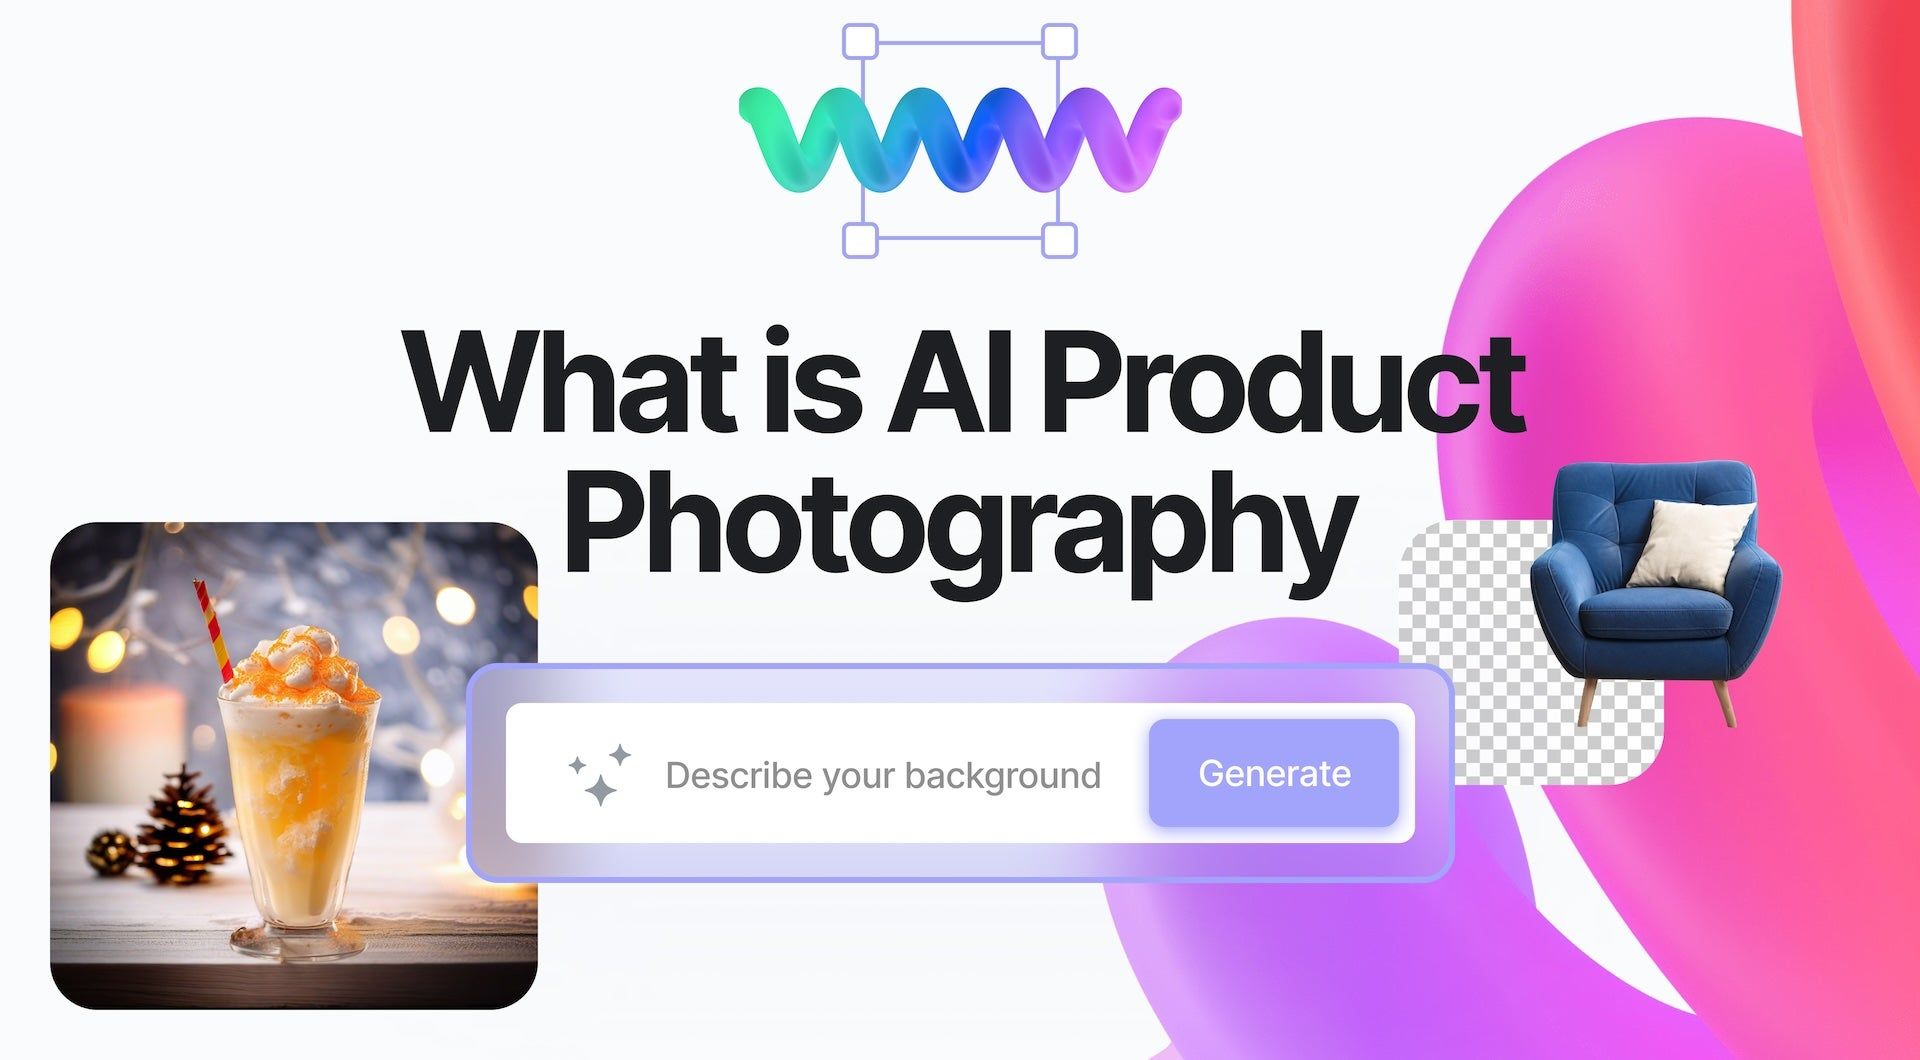 Picture for AI Product Photography for E-commerce: Important Things You Need to Know  article